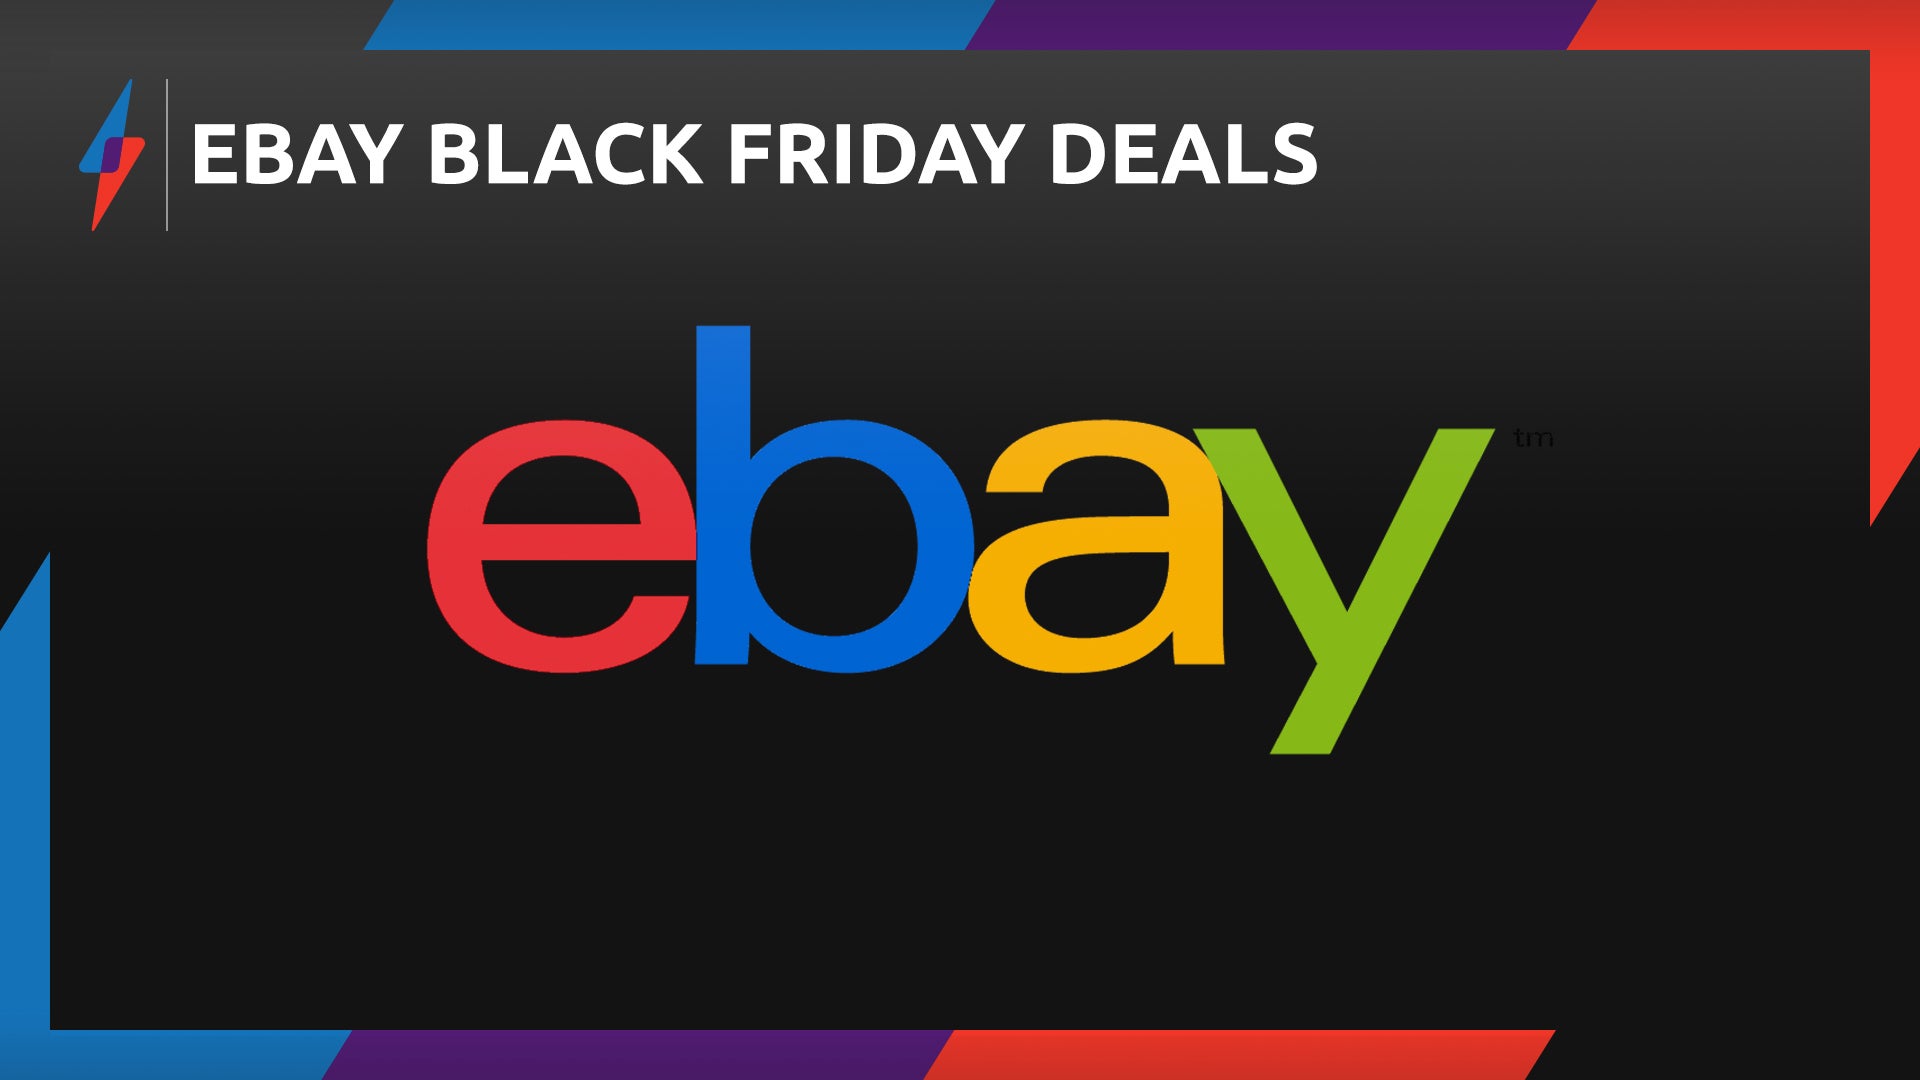 eBay Black Friday Deals: Best offers on new and refurbished tech - Will Retailers Have Software Deals On Black Friday